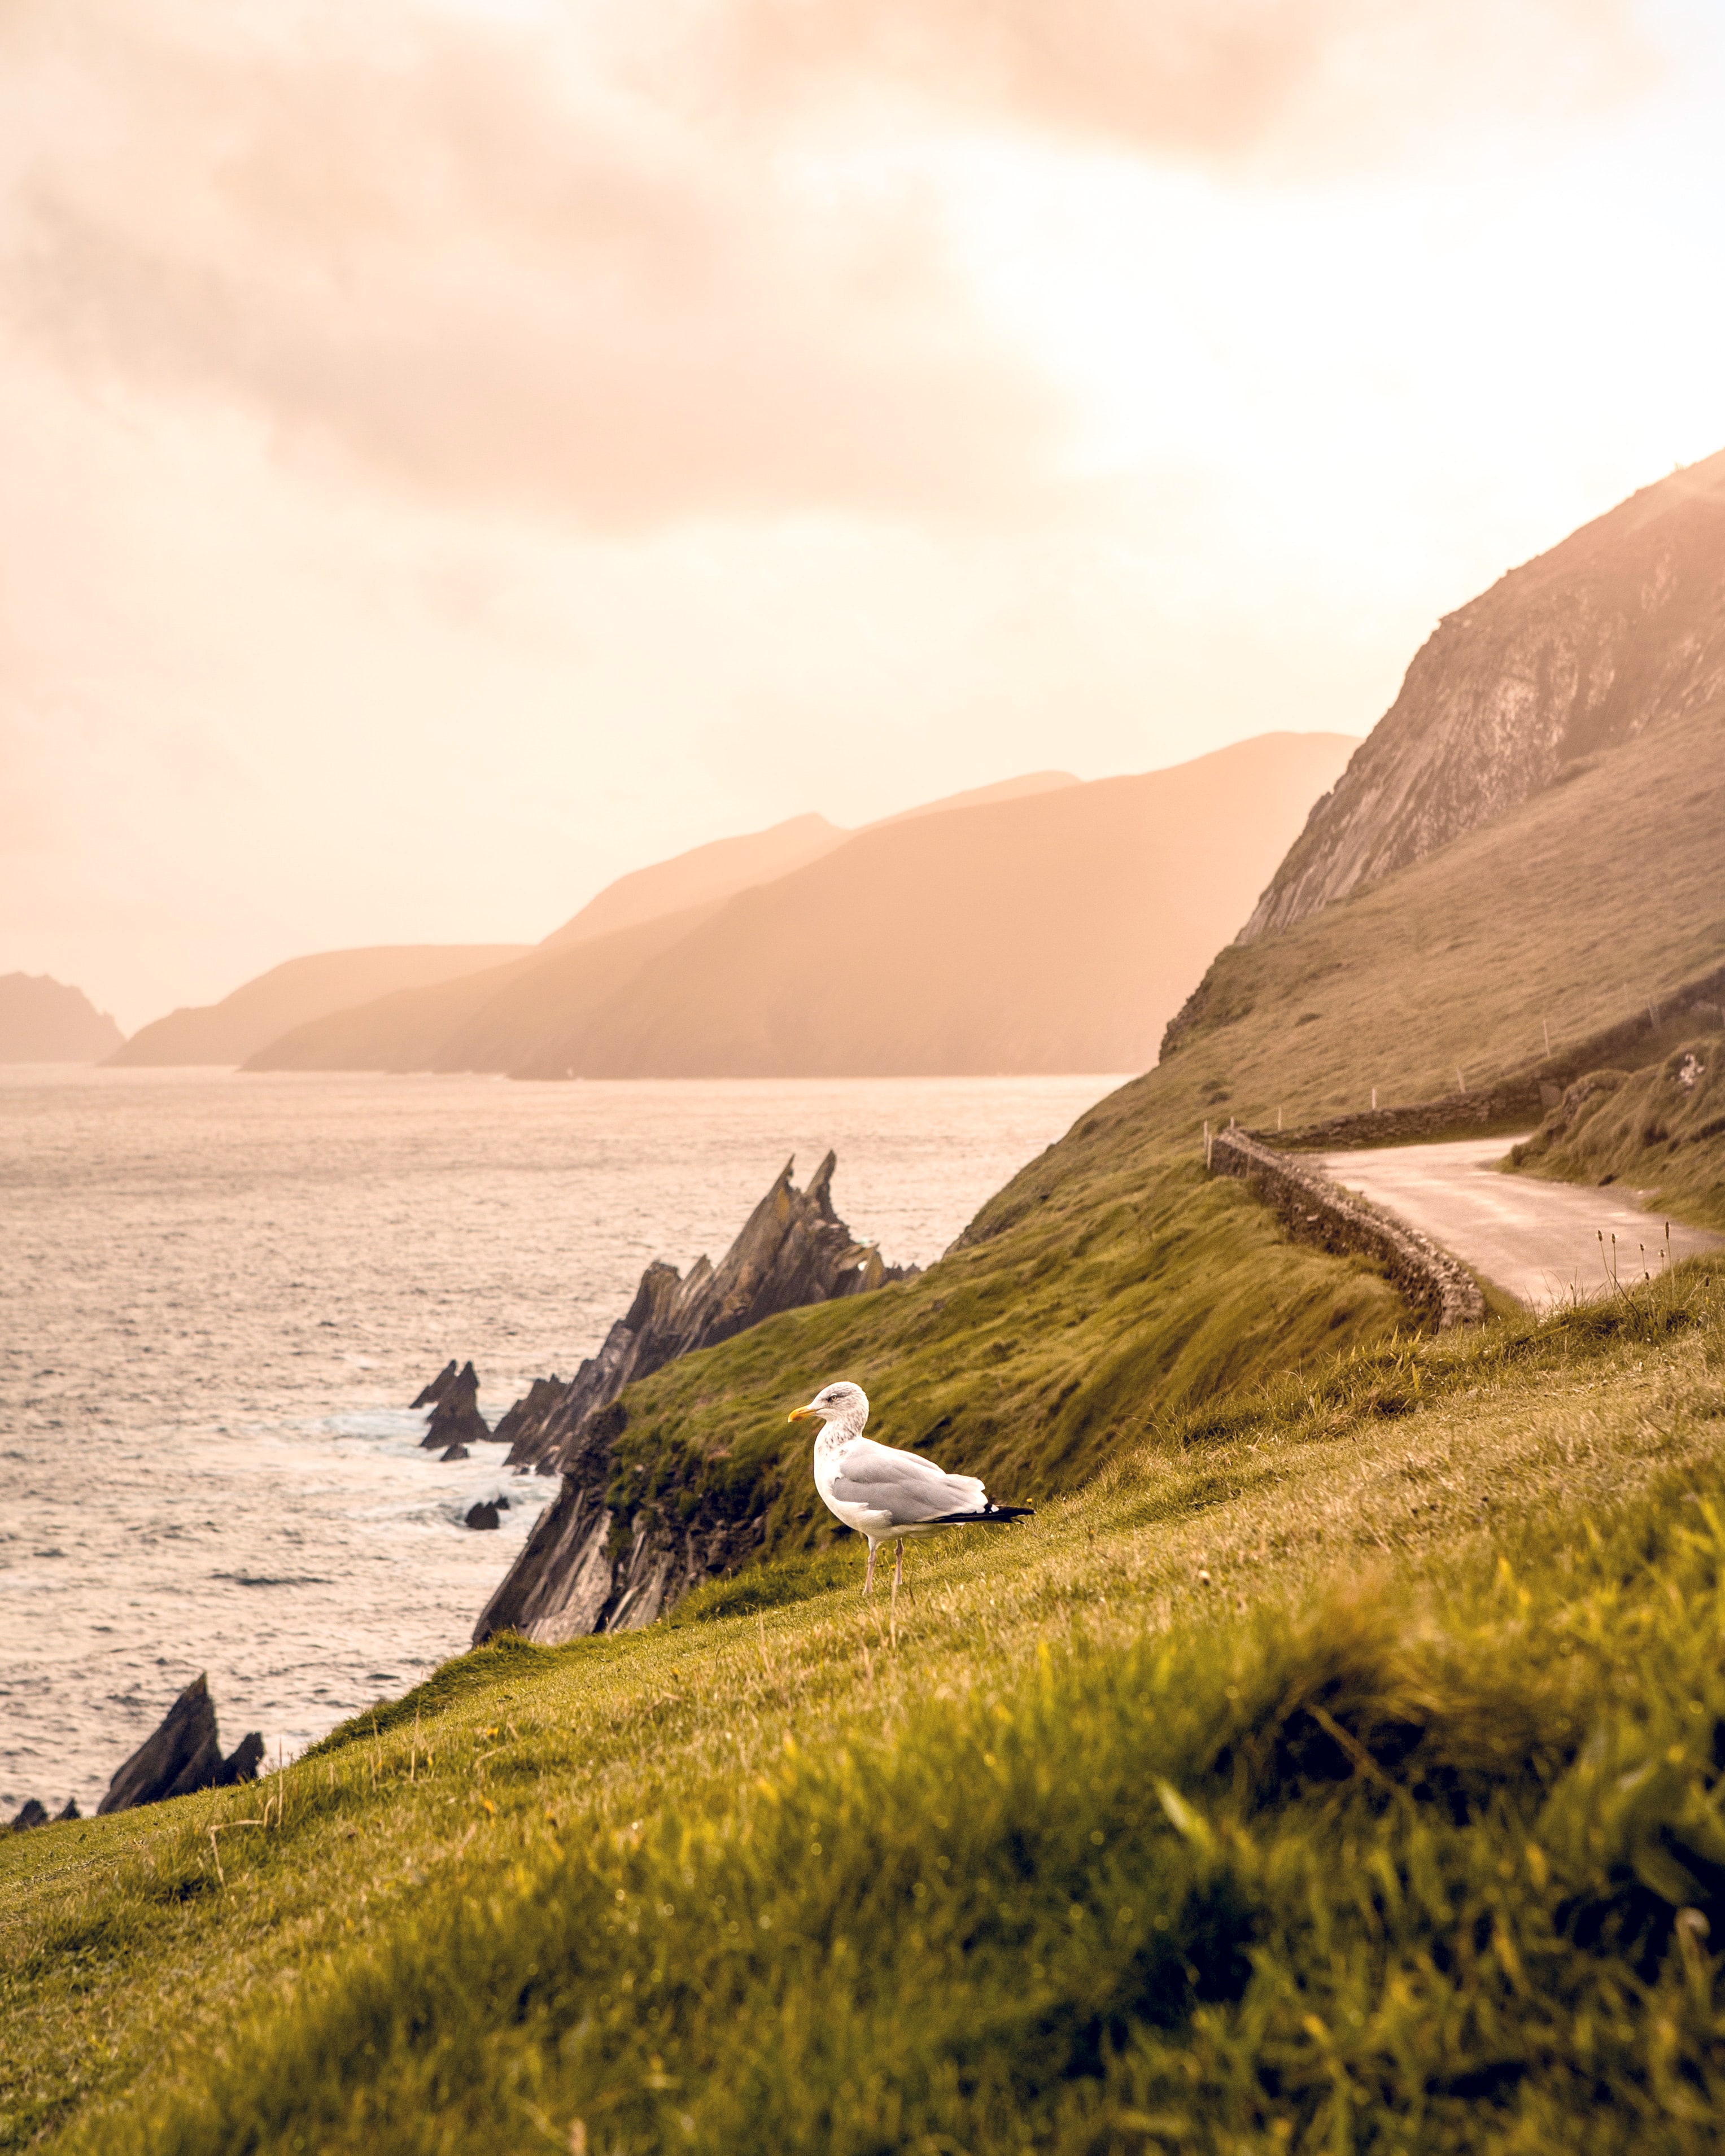 <p><strong>Location:</strong> County Kerry</p> <p>Pointing into the Atlantic Ocean like a finger, the Dingle Peninsula is an incredible stretch of natural beauty: <a href="https://www.cntraveler.com/galleries/2015-09-29/the-worlds-most-insanely-beautiful-coastlines?mbid=synd_msn_rss&utm_source=msn&utm_medium=syndication">seaside cliffs</a>, sheep-strewn fields, and Crayola-green hills. A short ferry ride away are the Blasket Islands, which once hosted a thriving community of Irish writers, but were abandoned in the 1950s after young residents emigrated en masse. Today, the on-site heritage museum—and remote, empty landscapes—are lovely yet somber reminders of a community lost.</p><p>Sign up to receive the latest news, expert tips, and inspiration on all things travel</p><a href="https://www.cntraveler.com/newsletter/the-daily?sourceCode=msnsend">Inspire Me</a>